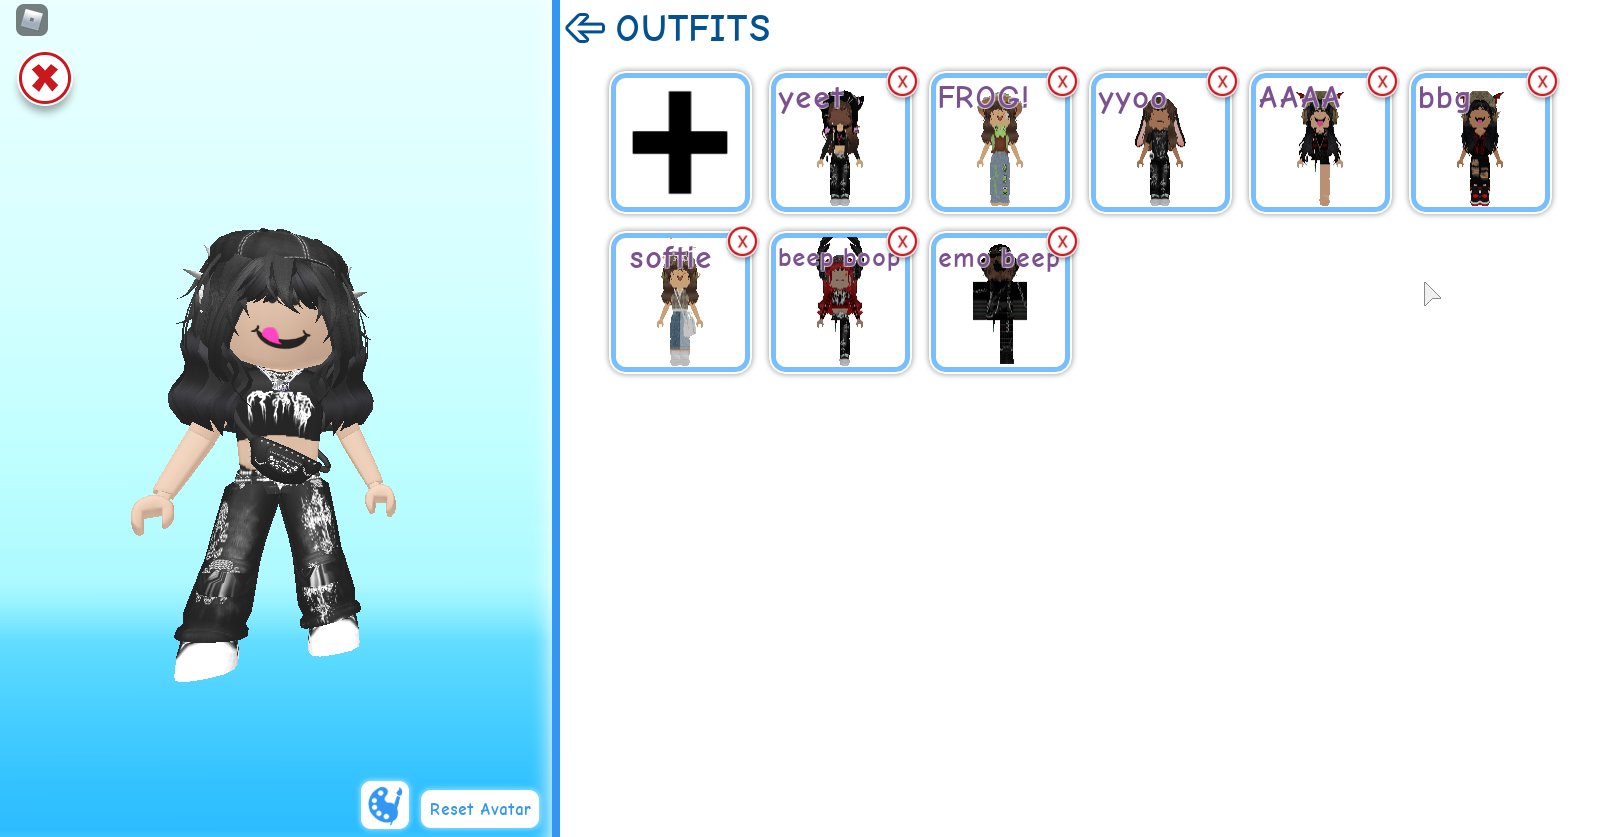 𝒹 𝓇 𝑒 𝒶 𝓂 𝒾 𝓃 𝑔 On Twitter Roblox Me In Meep City Making My Dream Outfits Be Like Https T Co Nzvpdbj7h1 Twitter - girl outfits roblox meep city outfits